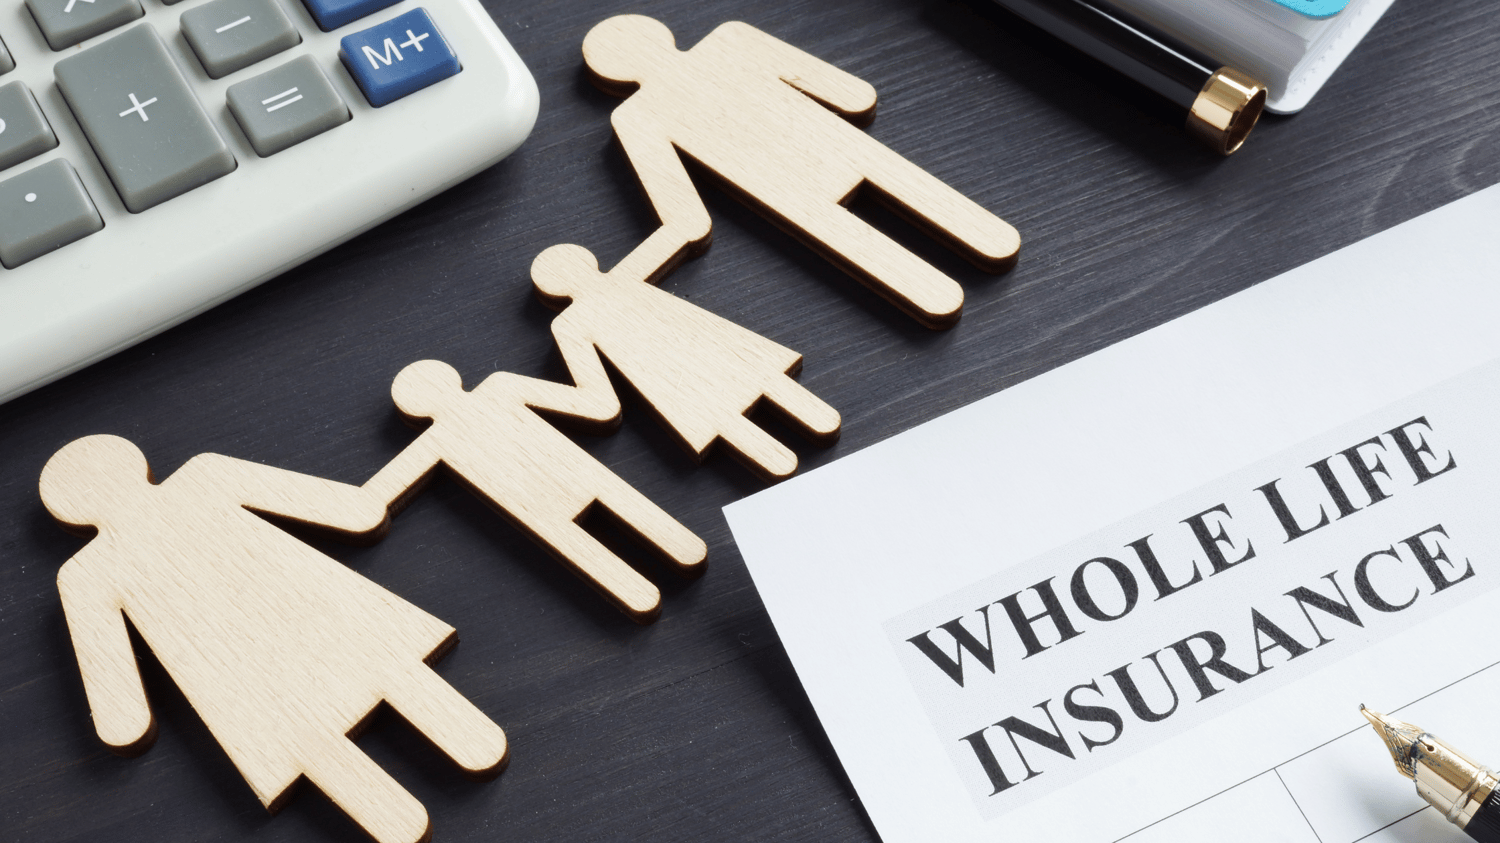 LONG-TERM BENEFITS OF WHOLE LIFE INSURANCE